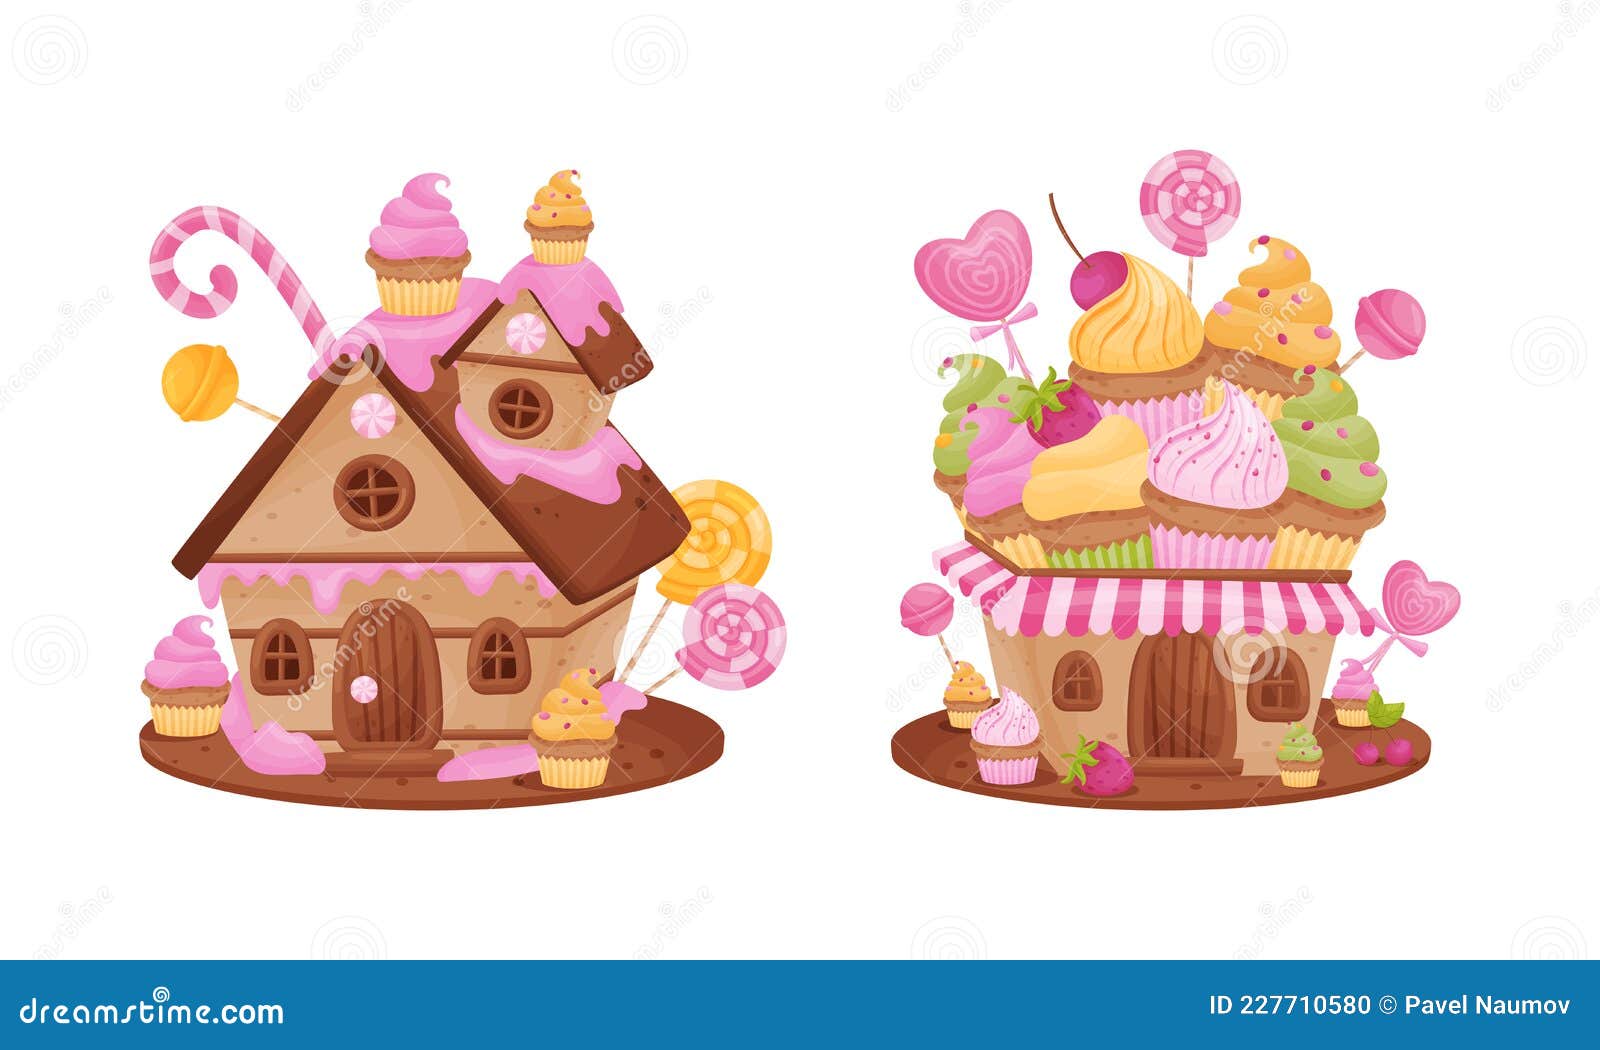 Cute Pink Candy Houses Set. Lovely Cottages Made of Cupcakes and